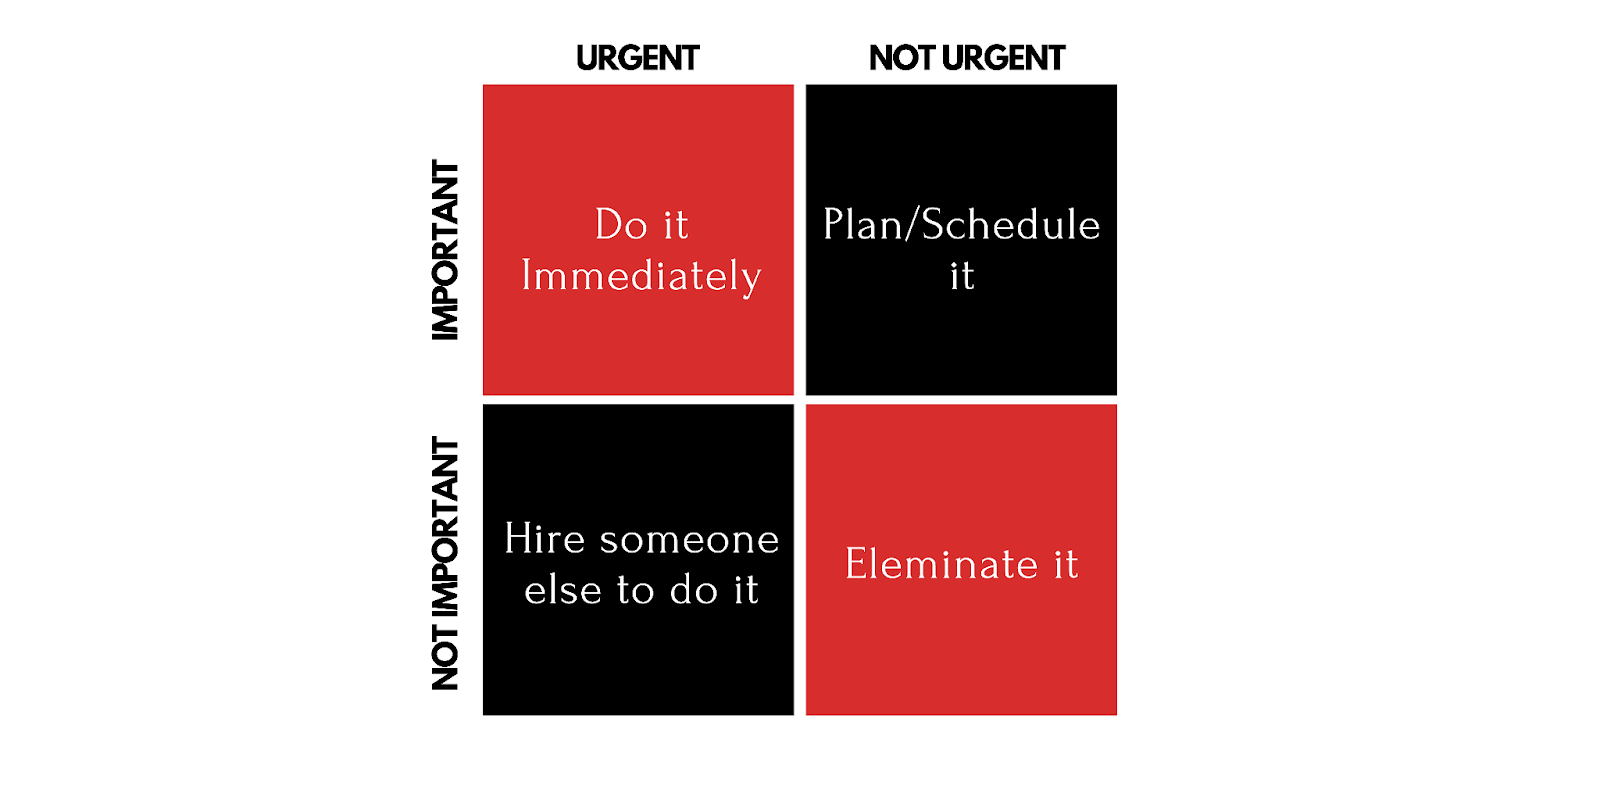 This is an image of urgent important matrix.